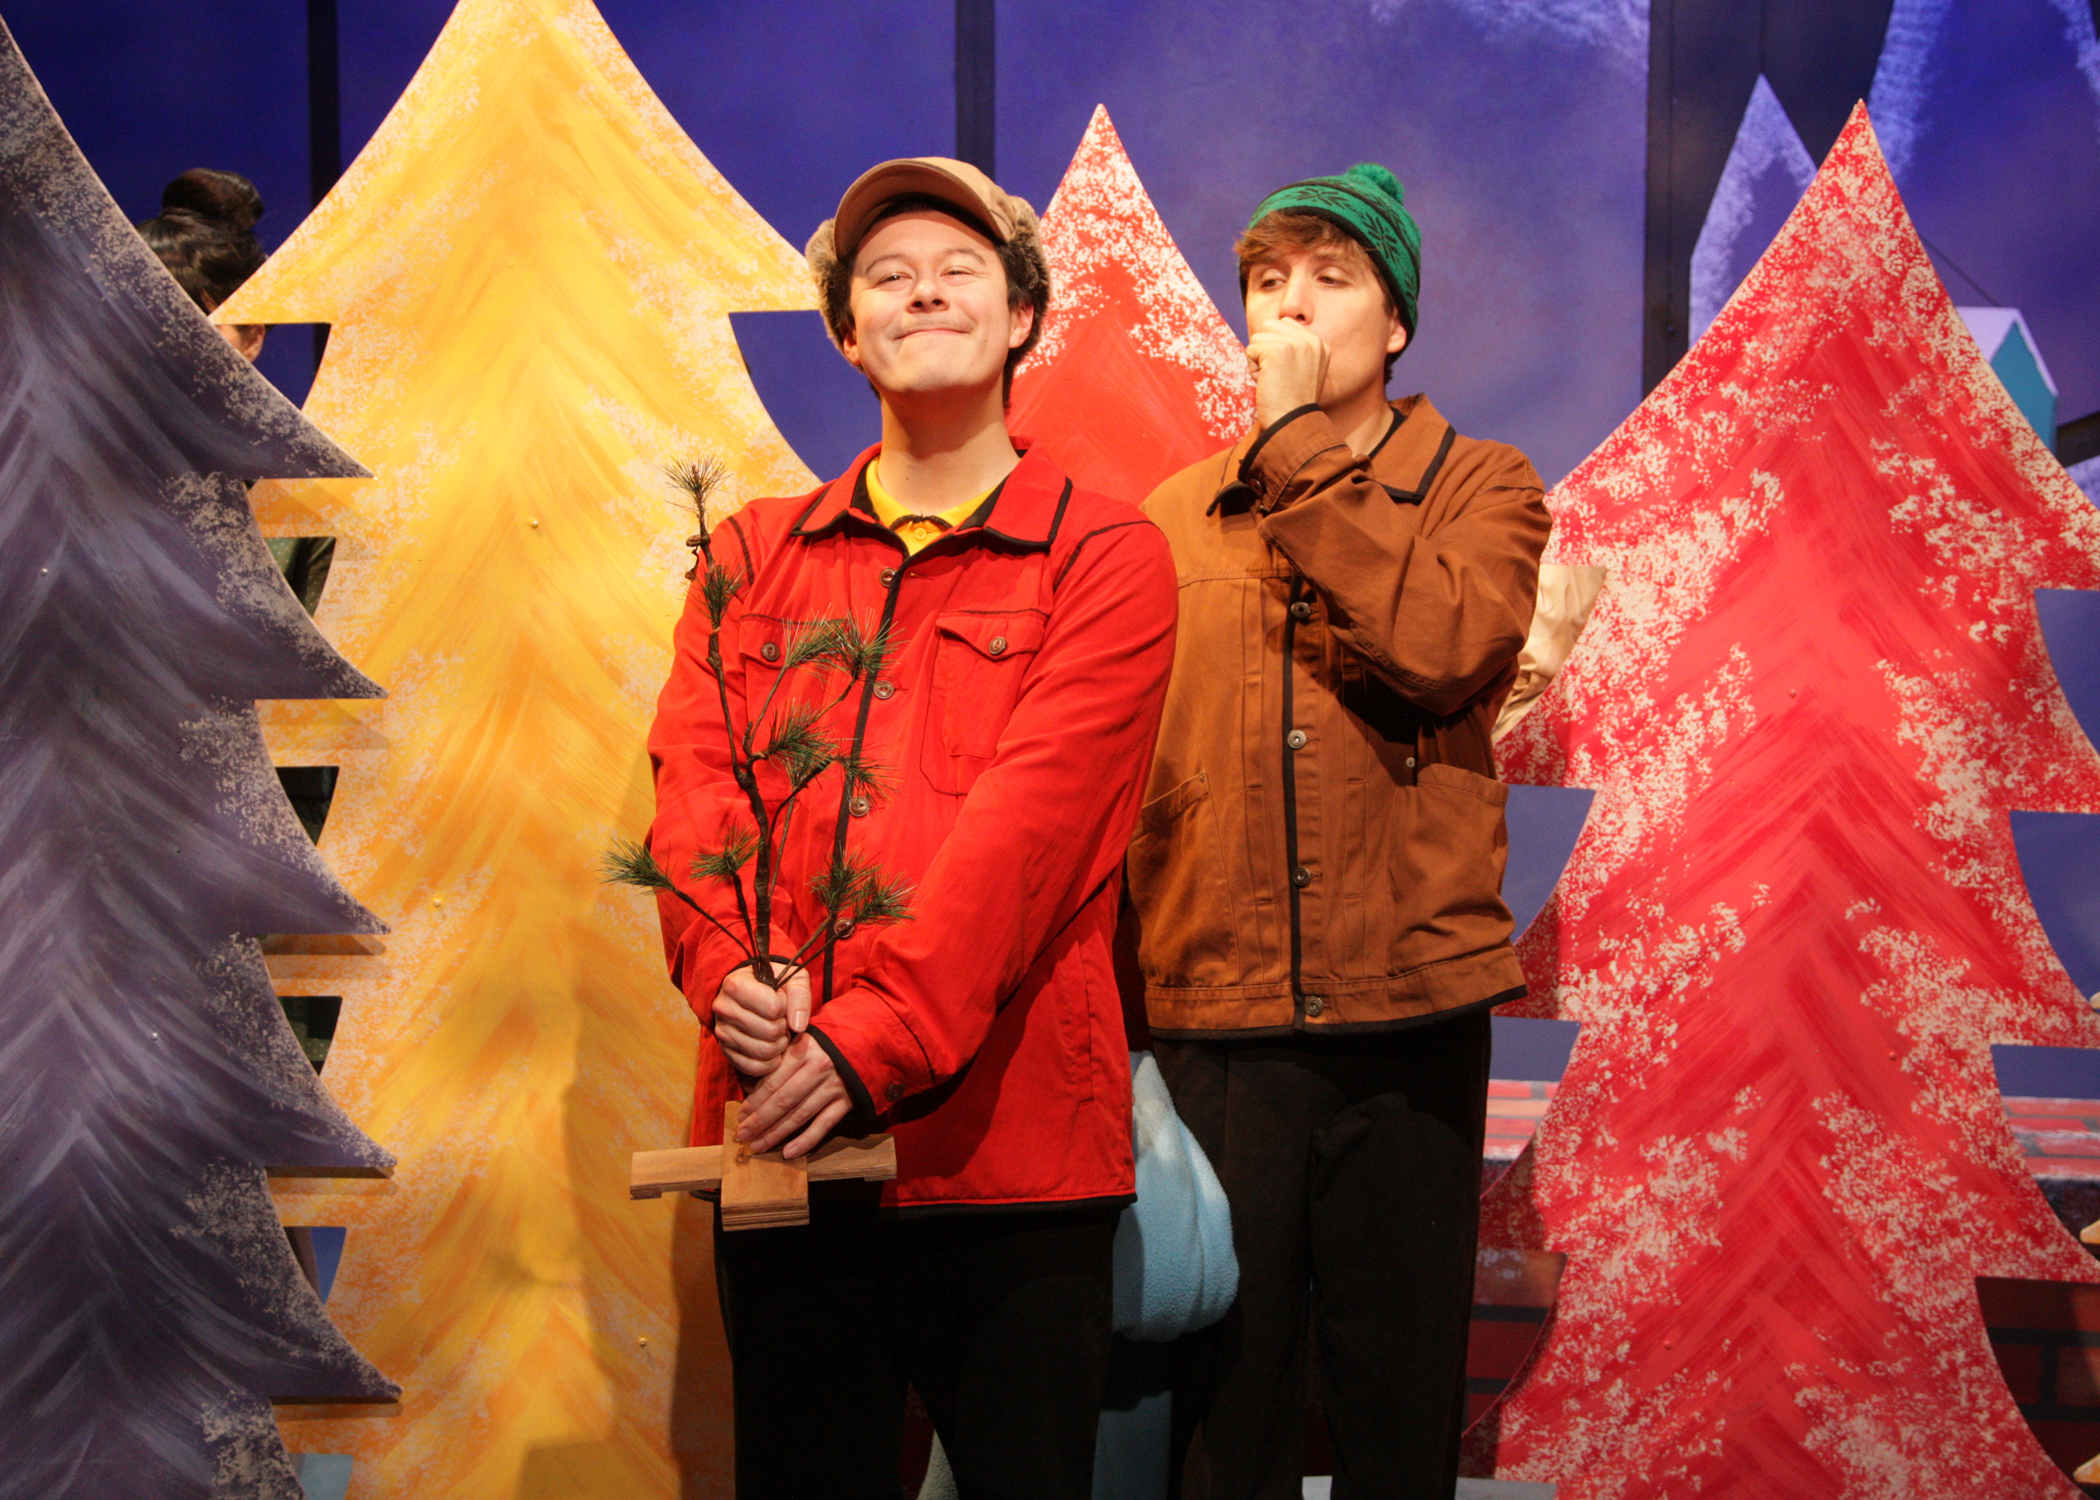 Matt Takahashi and Juston Gonzalez-Rodholm in the encore presentation of “A Charlie Brown Christmas.” This live version of Charles Schulz’s classic television special adapted by Eric Schaeffer and directed by James Michael McHale will run thru December 19, 2021 on the Fyda-Mar Stage at the Bette Aitken theater arts Center.